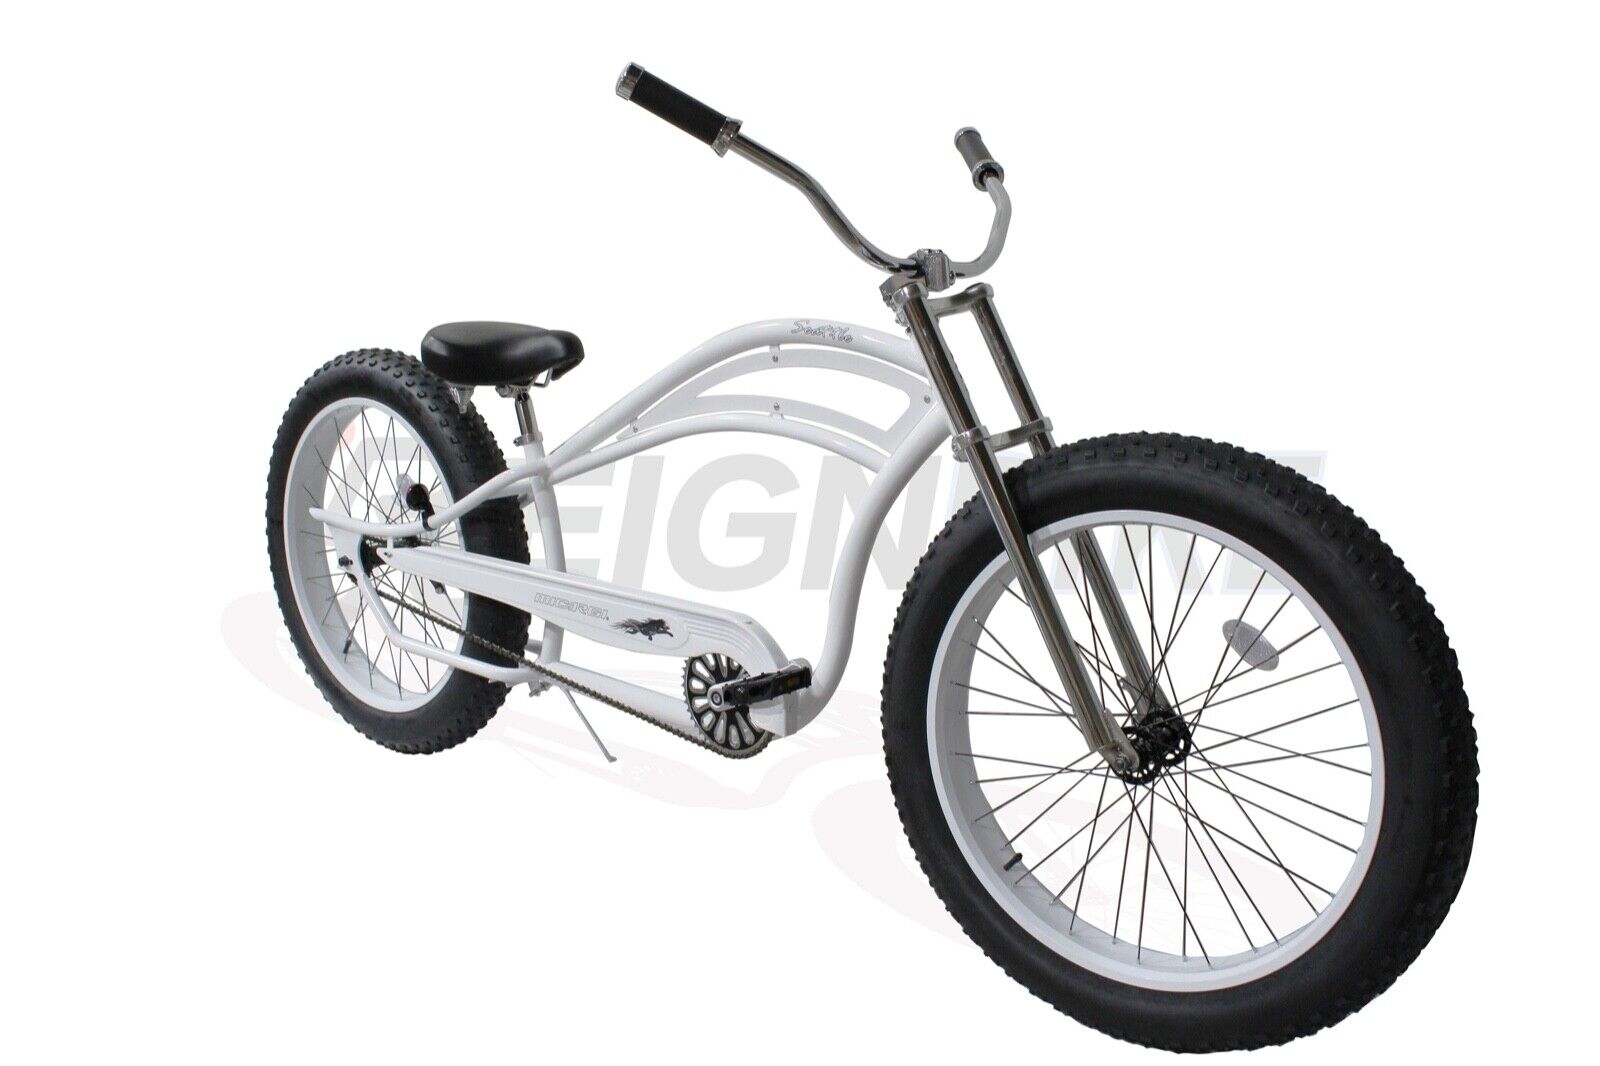 Bicycle for Sale: 26" x 4.0 Fat Tire Stretch Beach Cruiser Bicycle Chopper Style Coaster brake in South El Monte, California